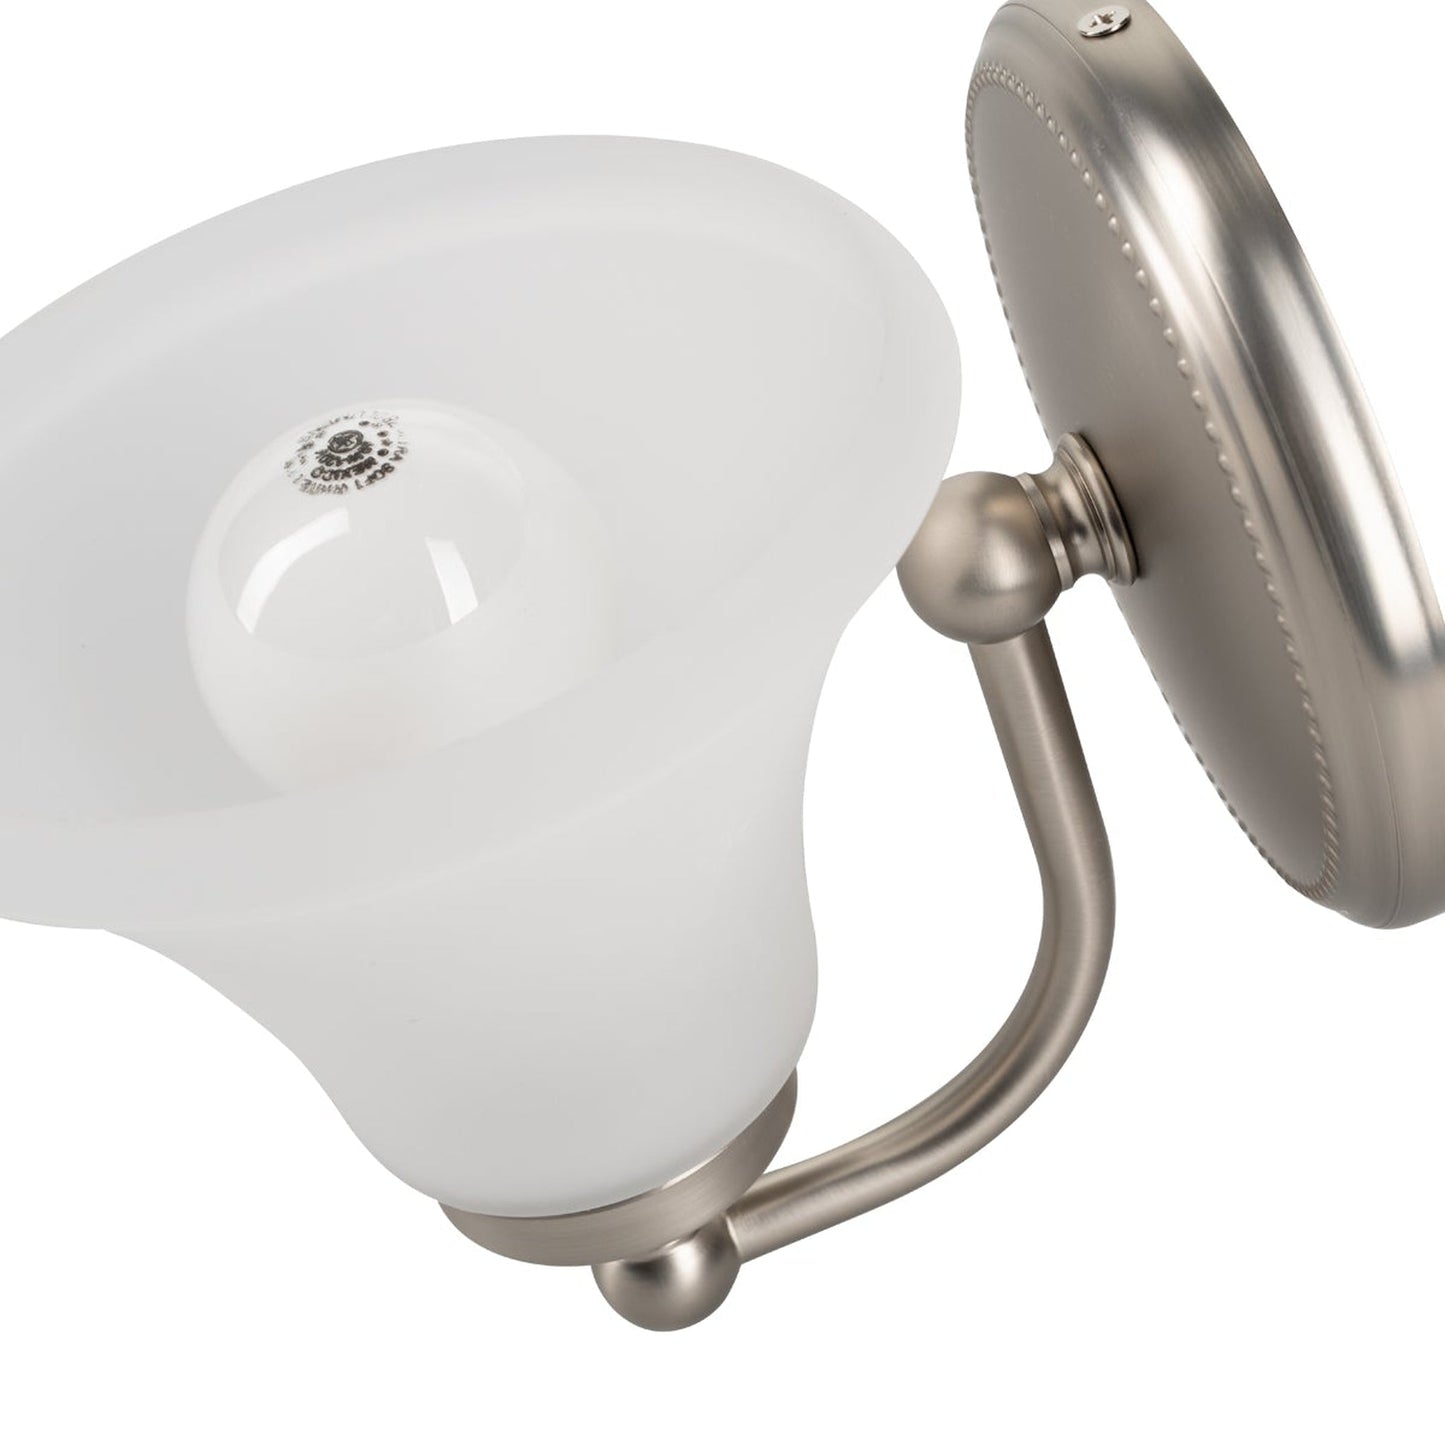 Norwell Lighting Soleil 8" x 7" 1-Light Sconce Brushed Nickel Vanity Light With Flared Glass Diffuser